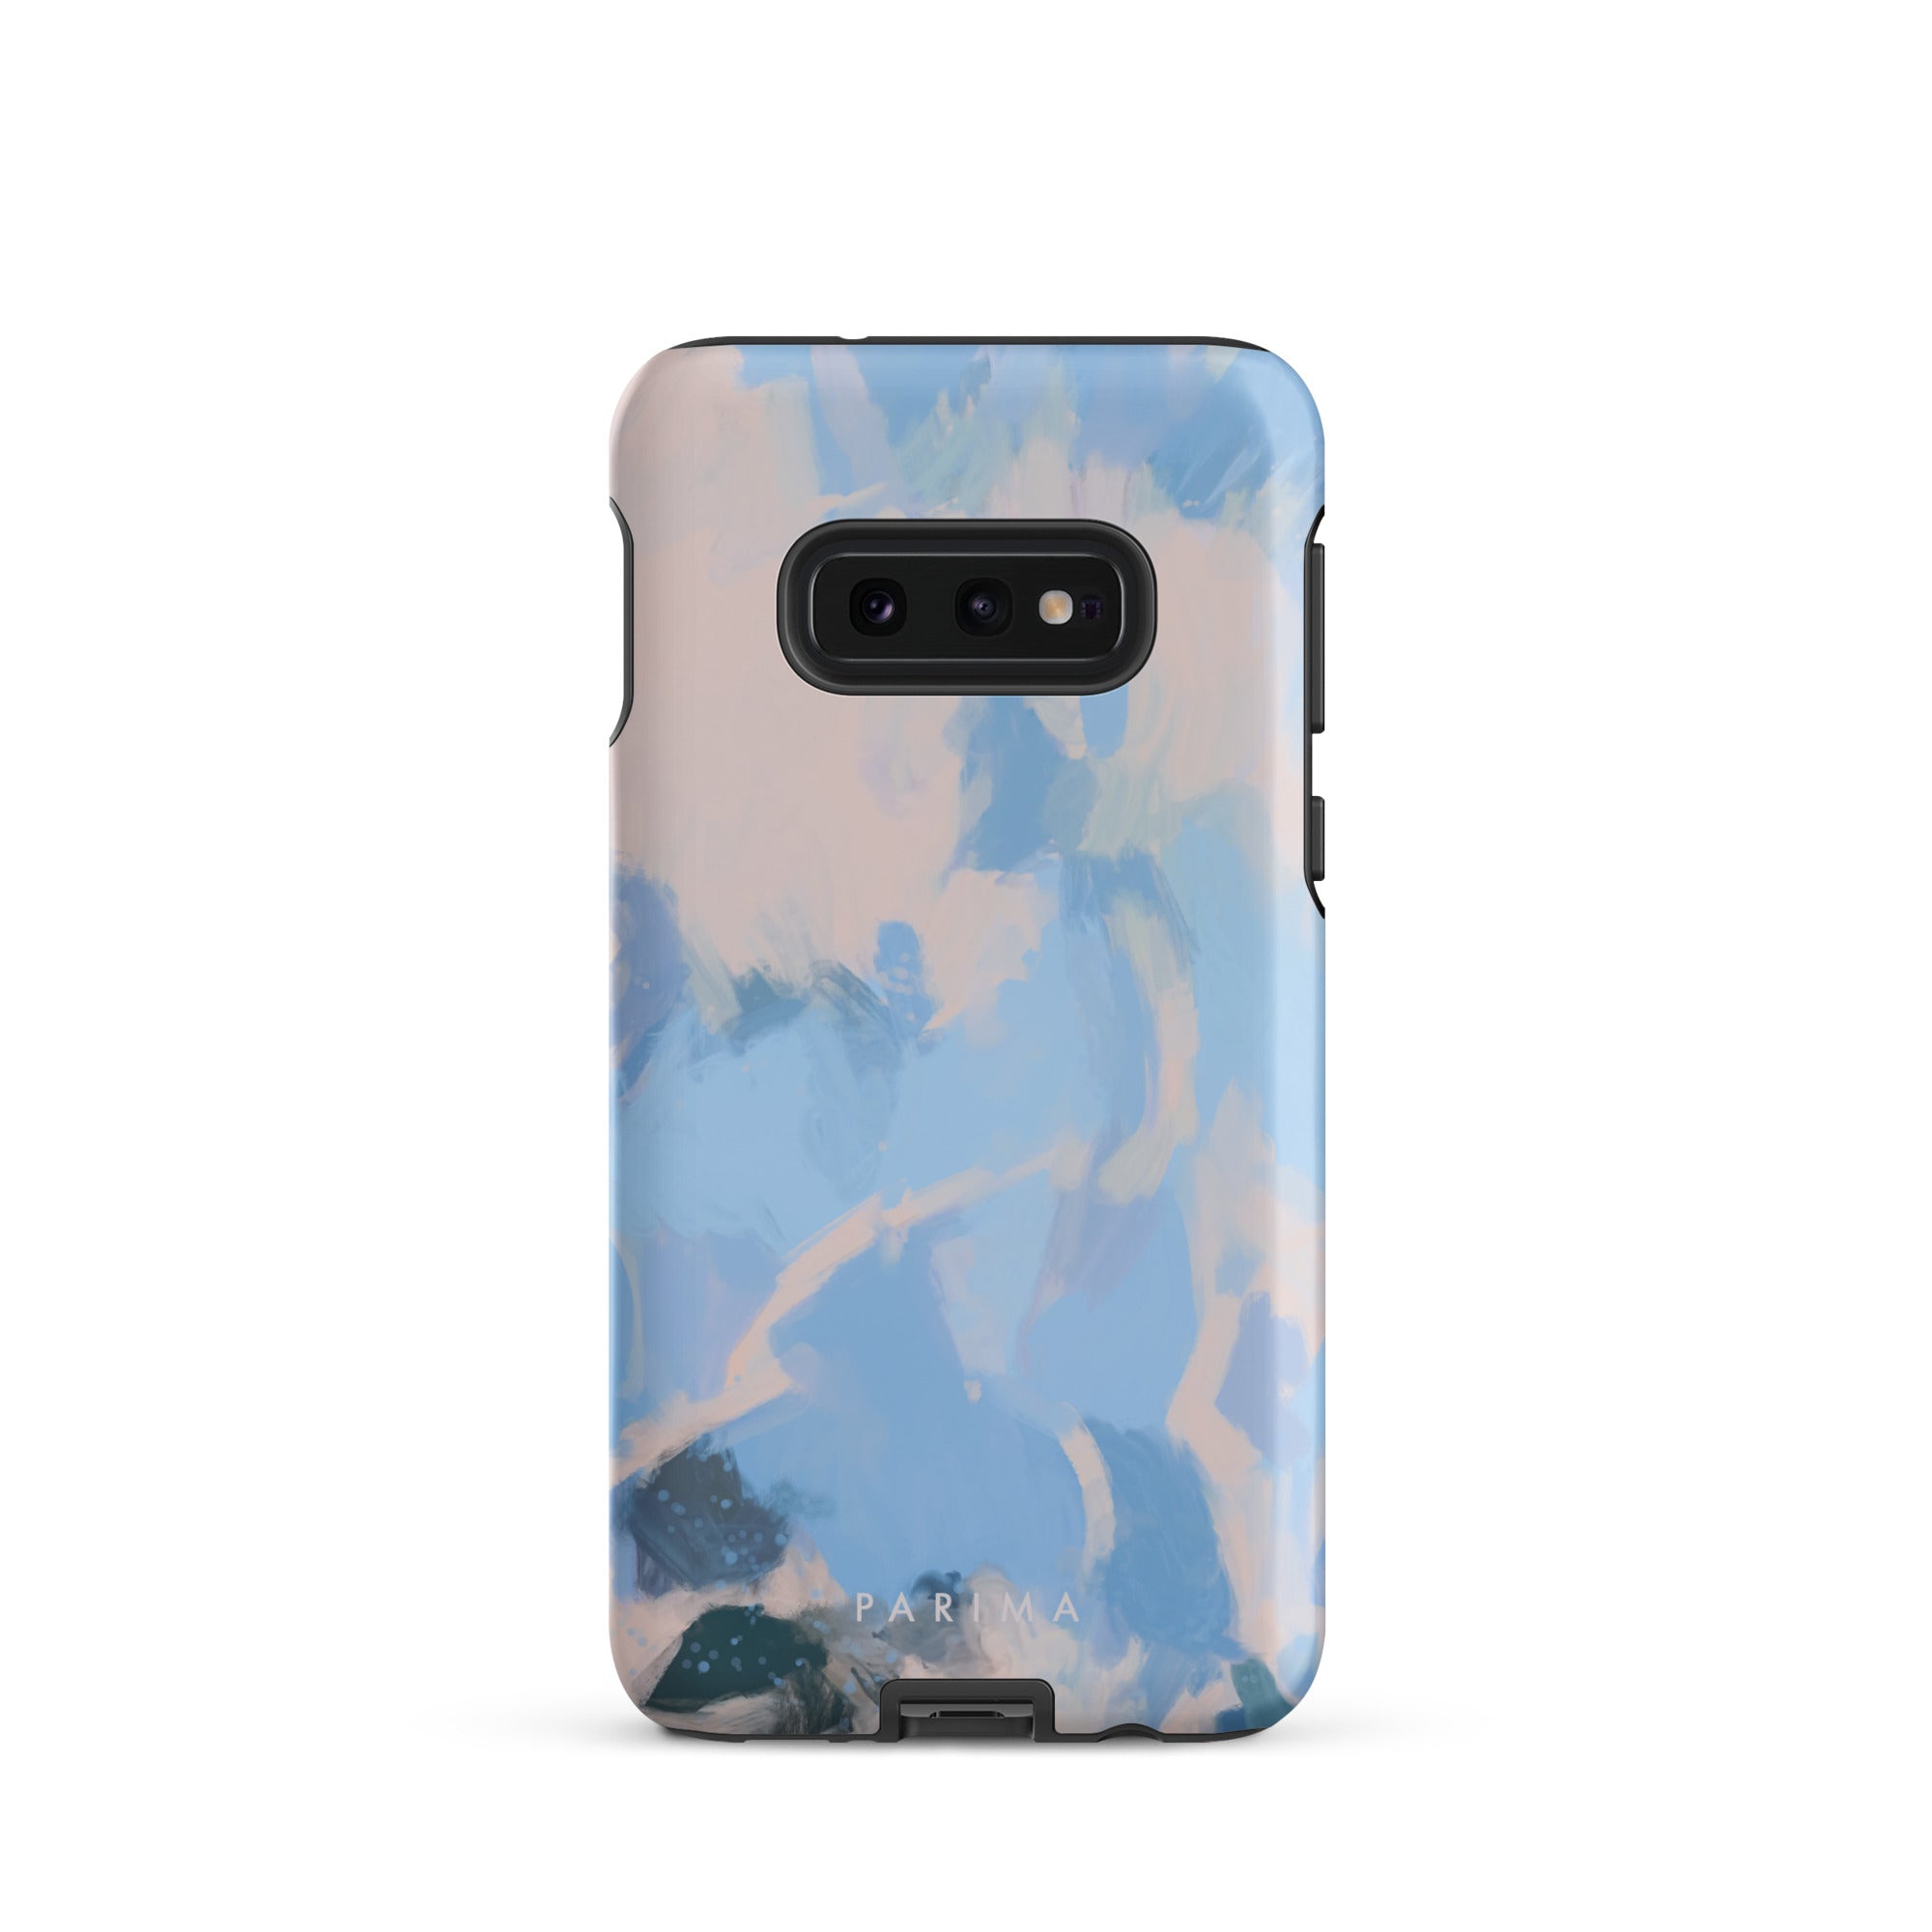 Dove, blue and pink abstract art on Samsung Galaxy S10e tough case by Parima Studio